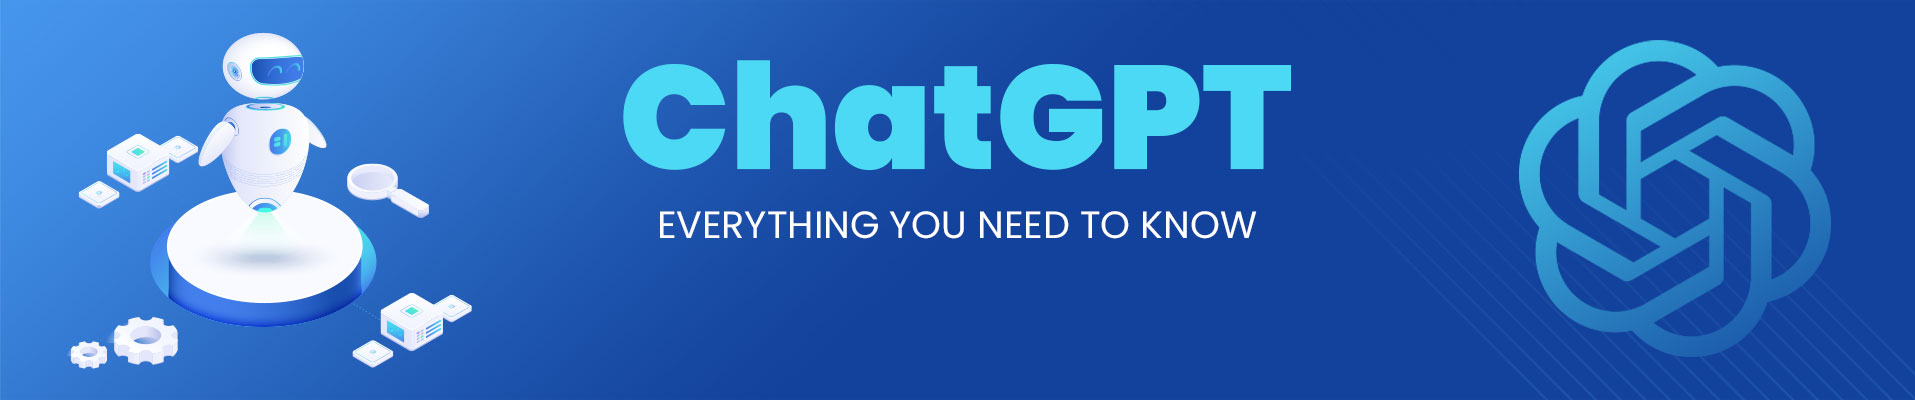 ChatGPT Everything You Need To know